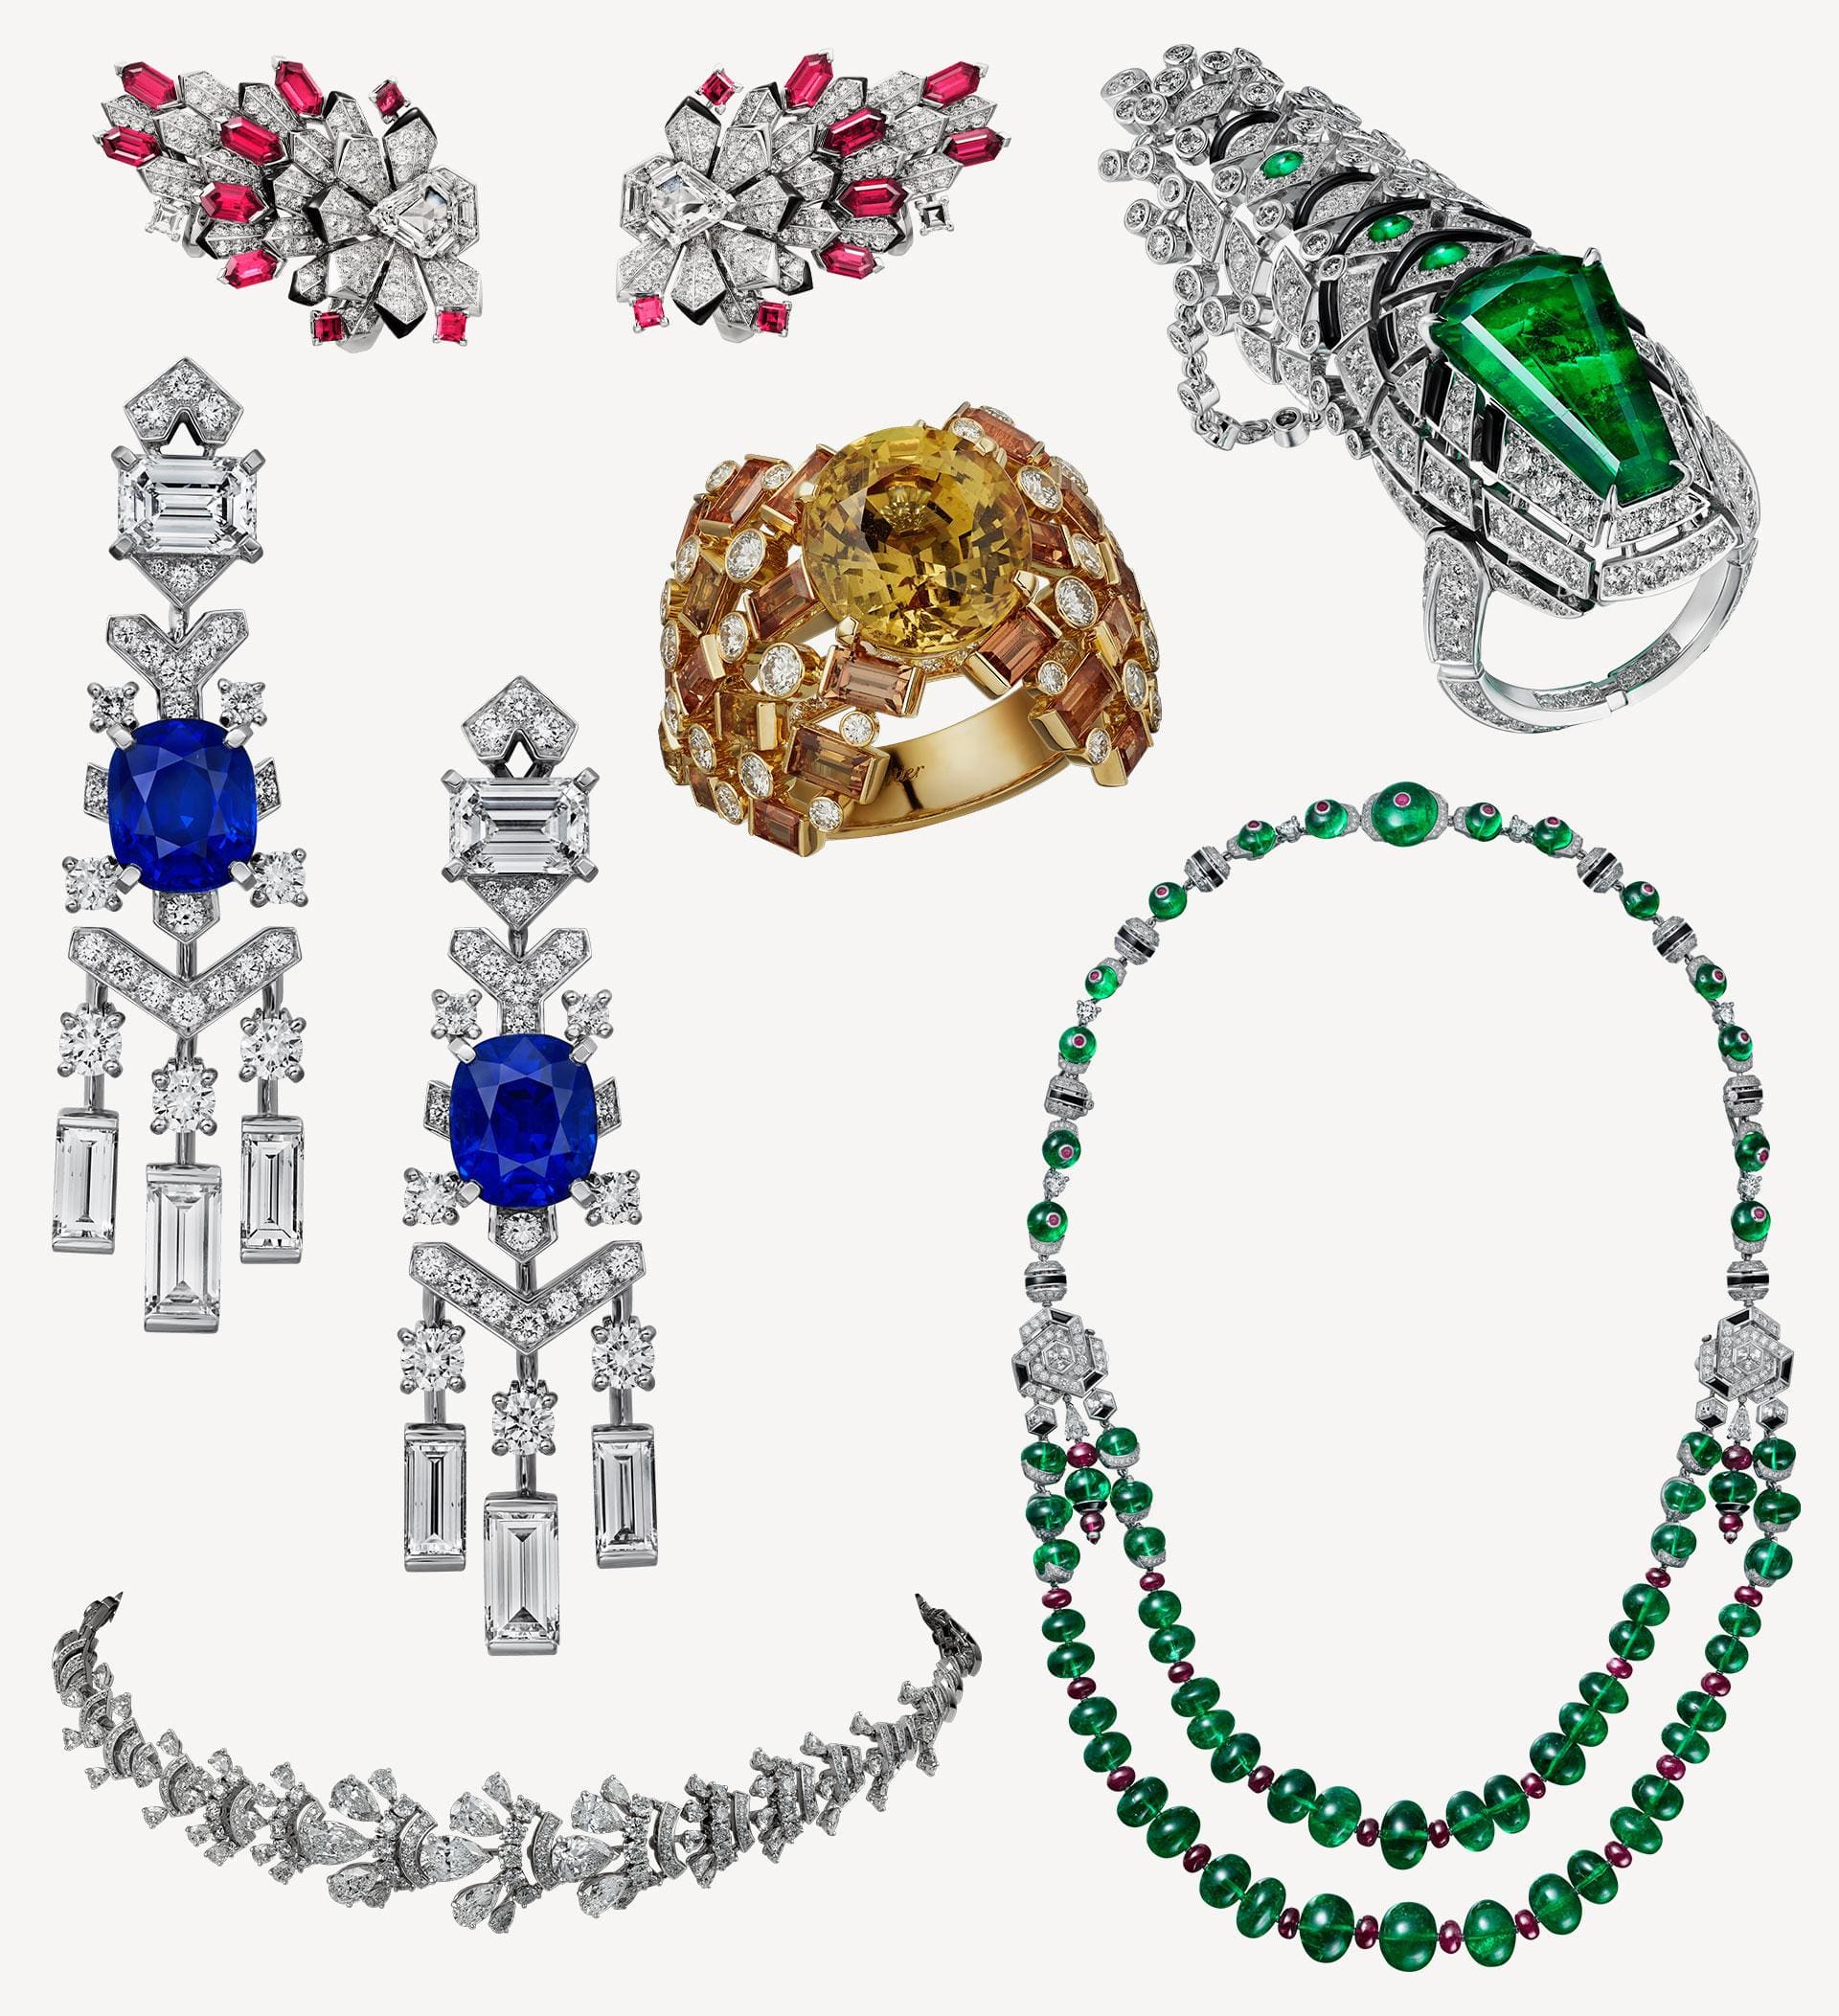 New Cartier SurNaturel High Jewellery Collection inspired by Nature